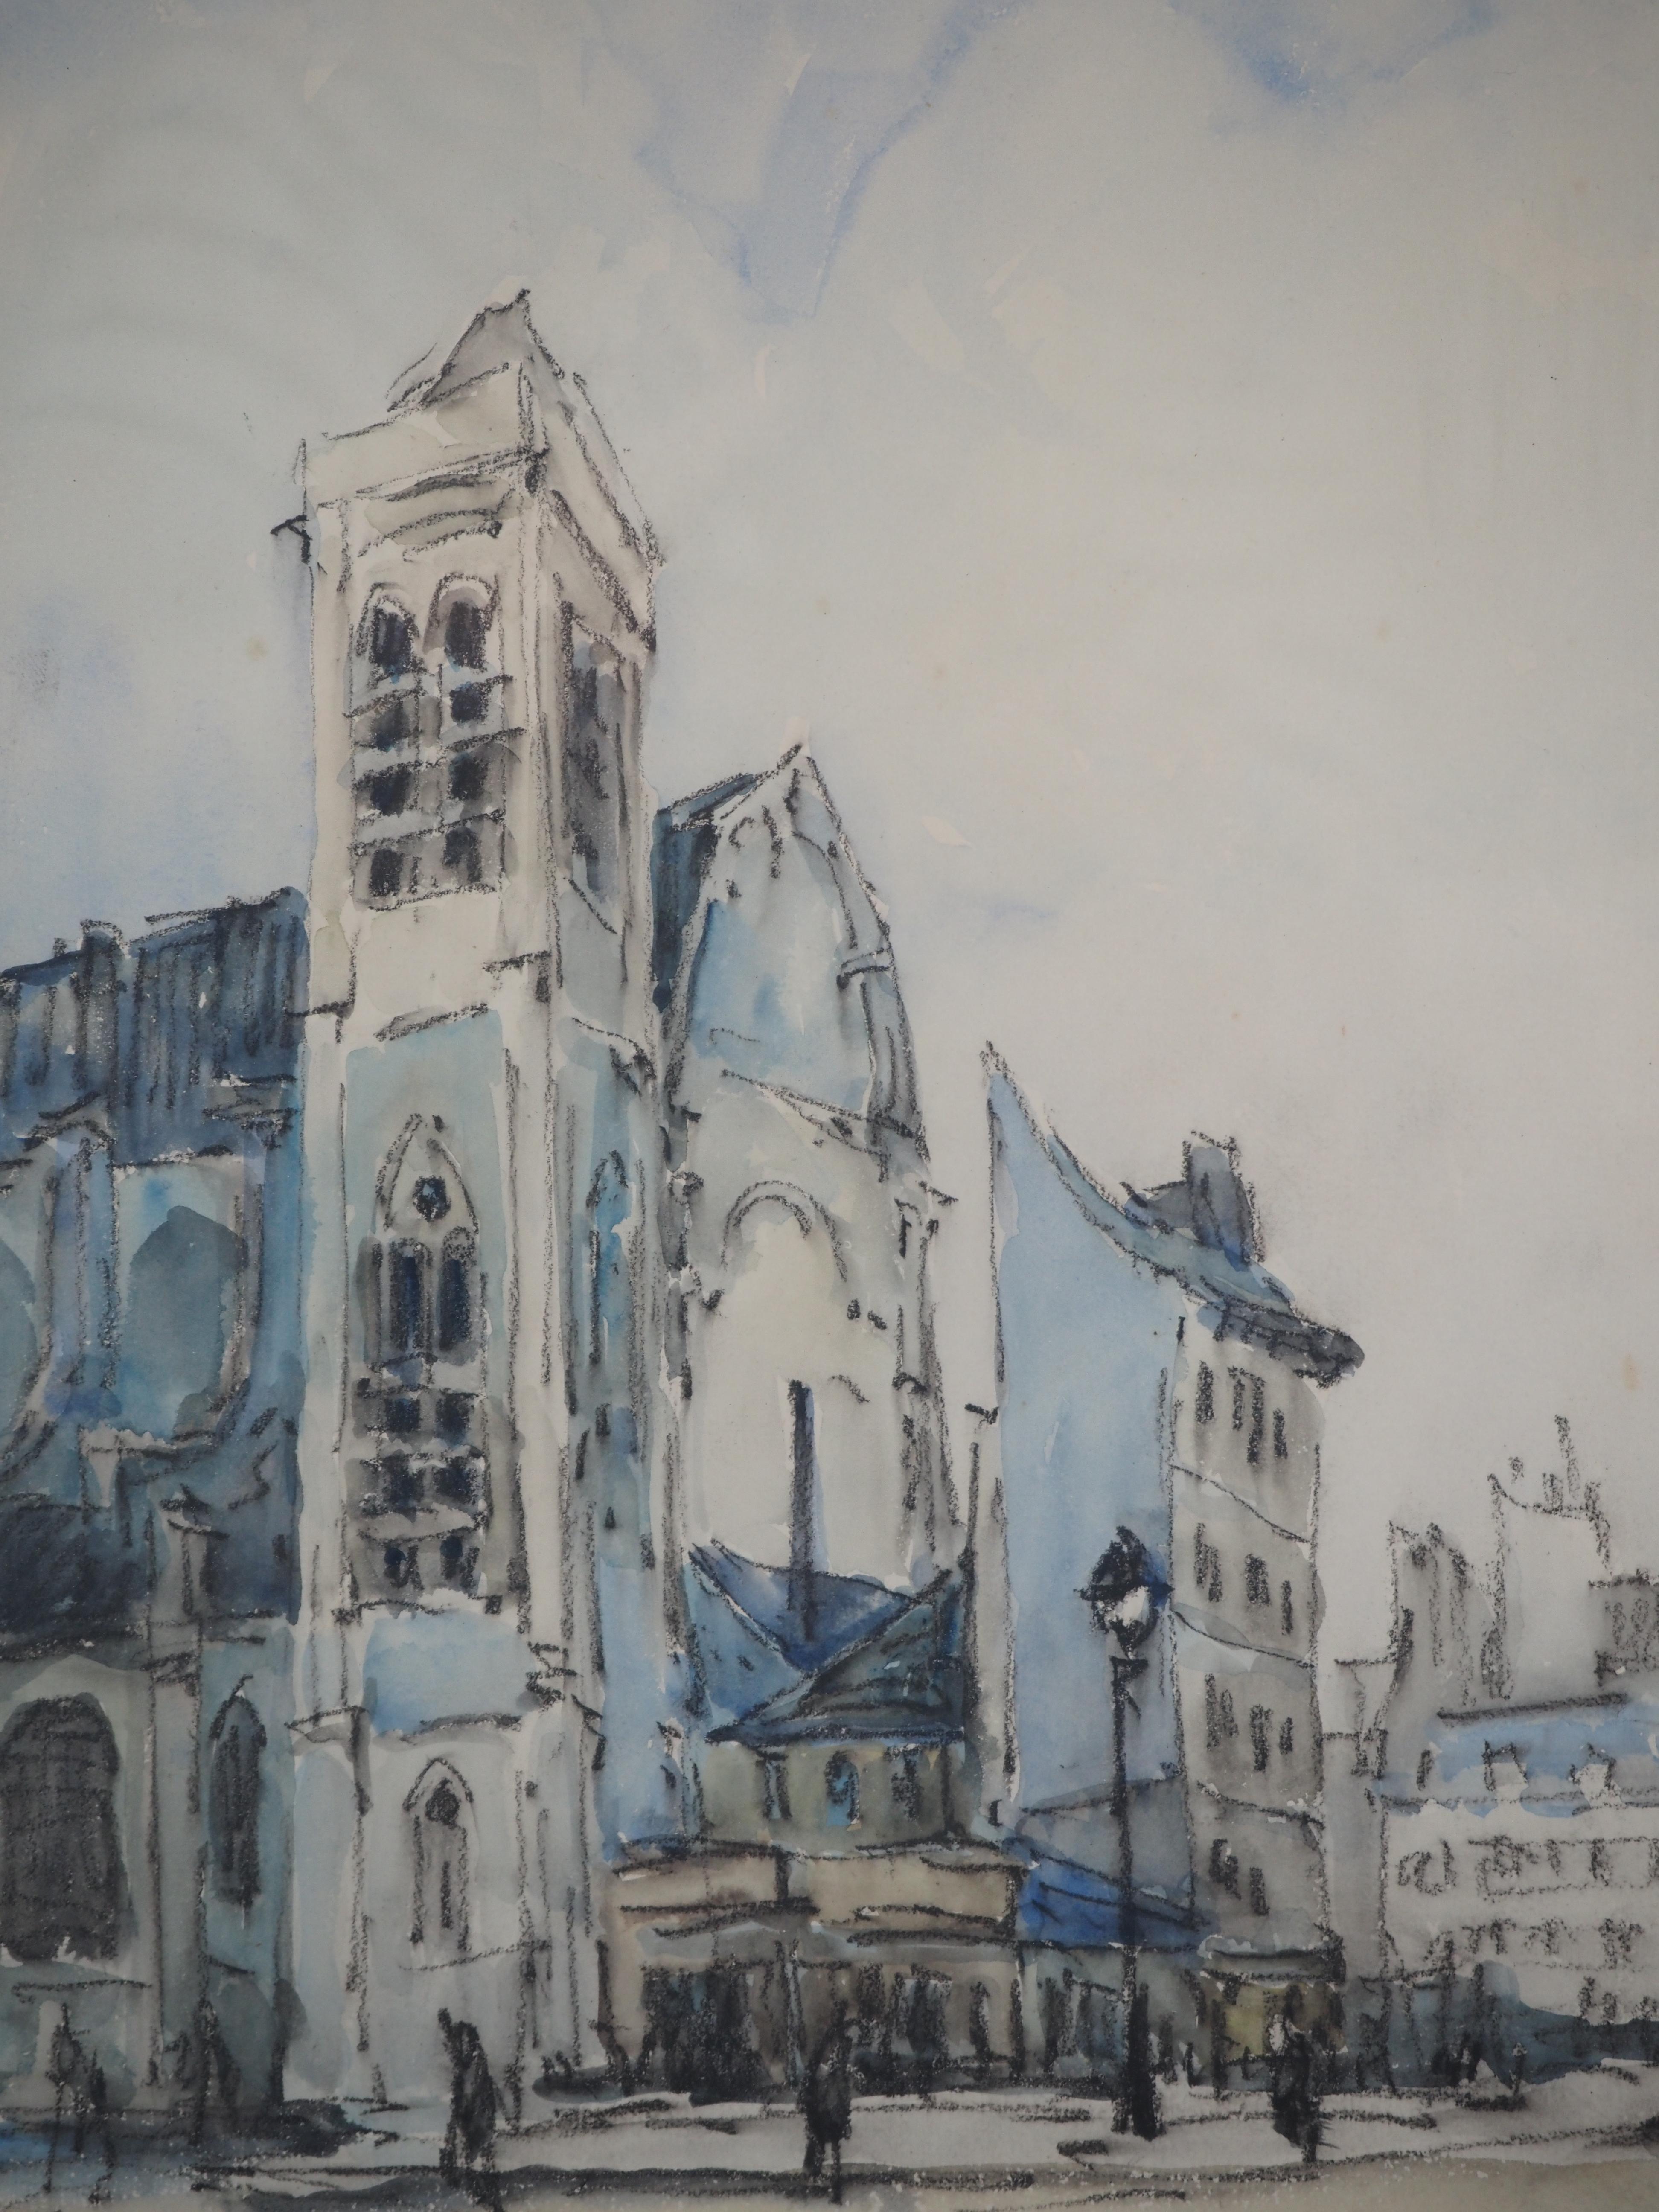 FRANK-WILL (1900-1951)
Old Church in Paris

Watercolor and charcoals
Signed bottom left
On paper 32 x 24 cm (c. 13 x 10 in) at view
Présented in silver wood frame 52 x 44 cm (c. 20 x 17 in)

Excellent condition, light uses to the frame